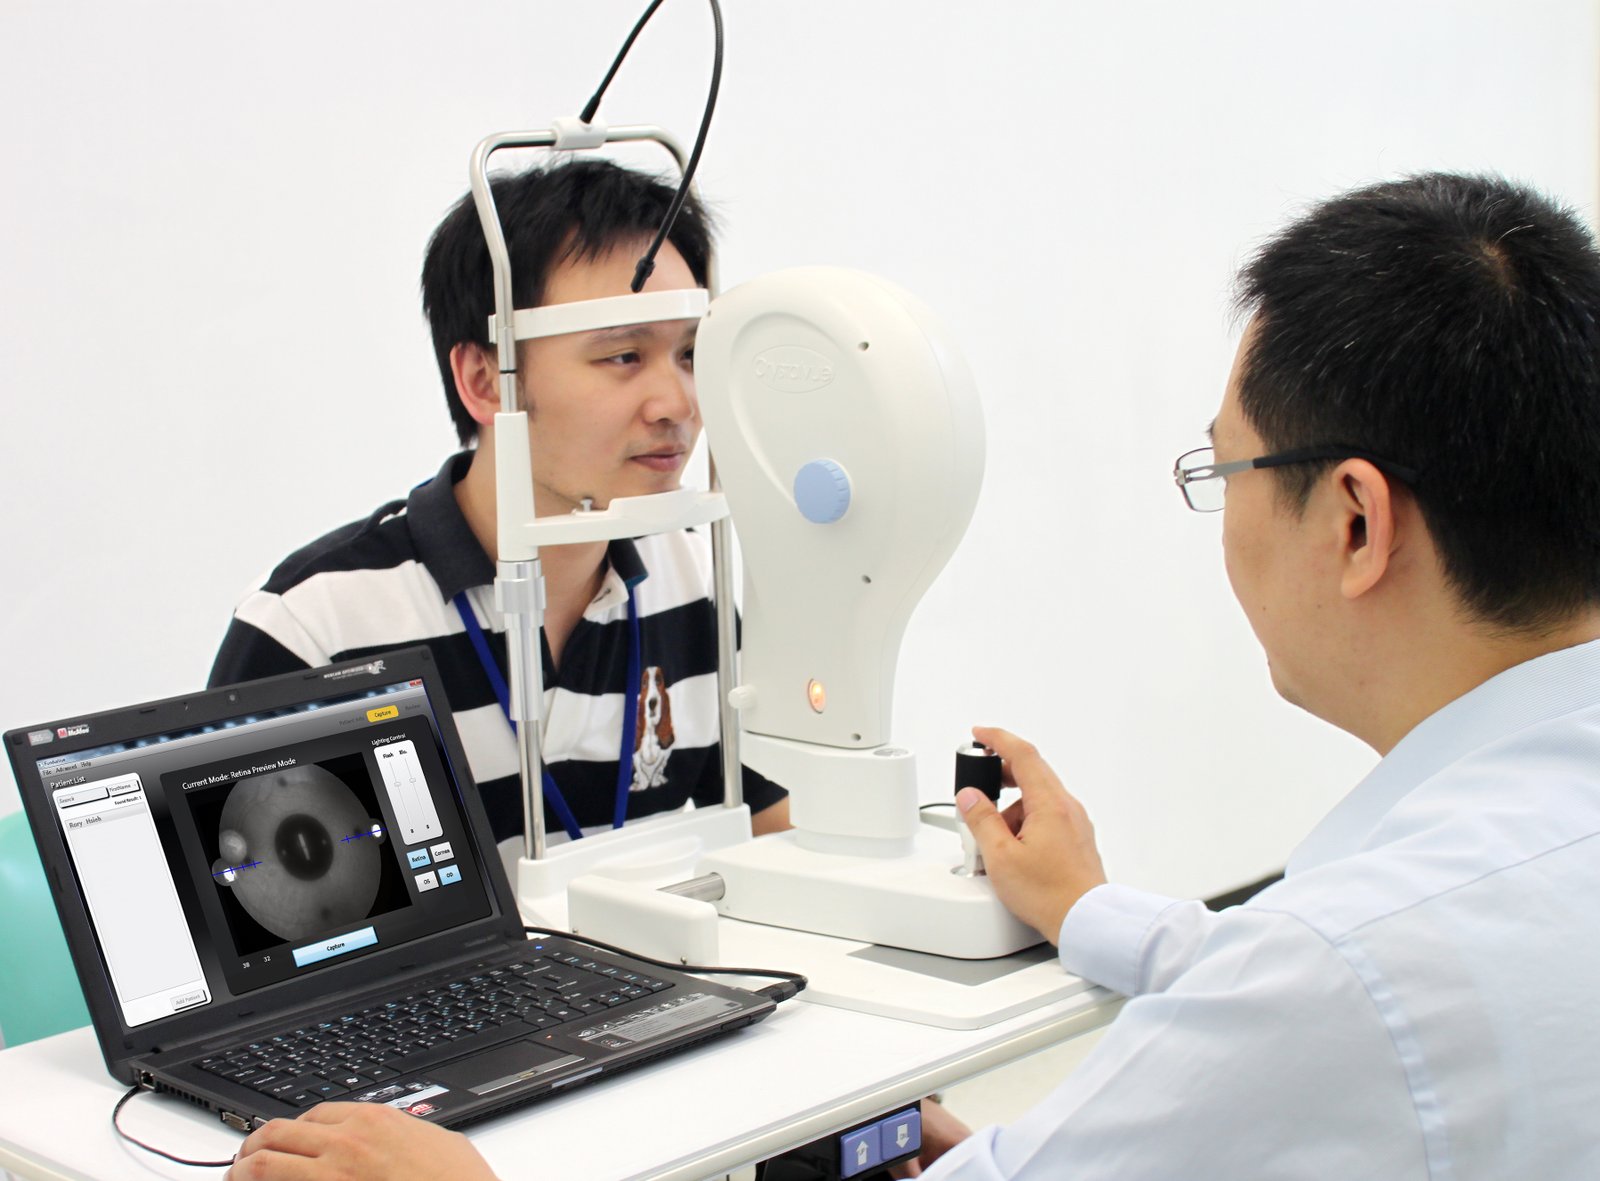 Digital Non-Mydriatic Fundus Camera is compact and easy-to-operate